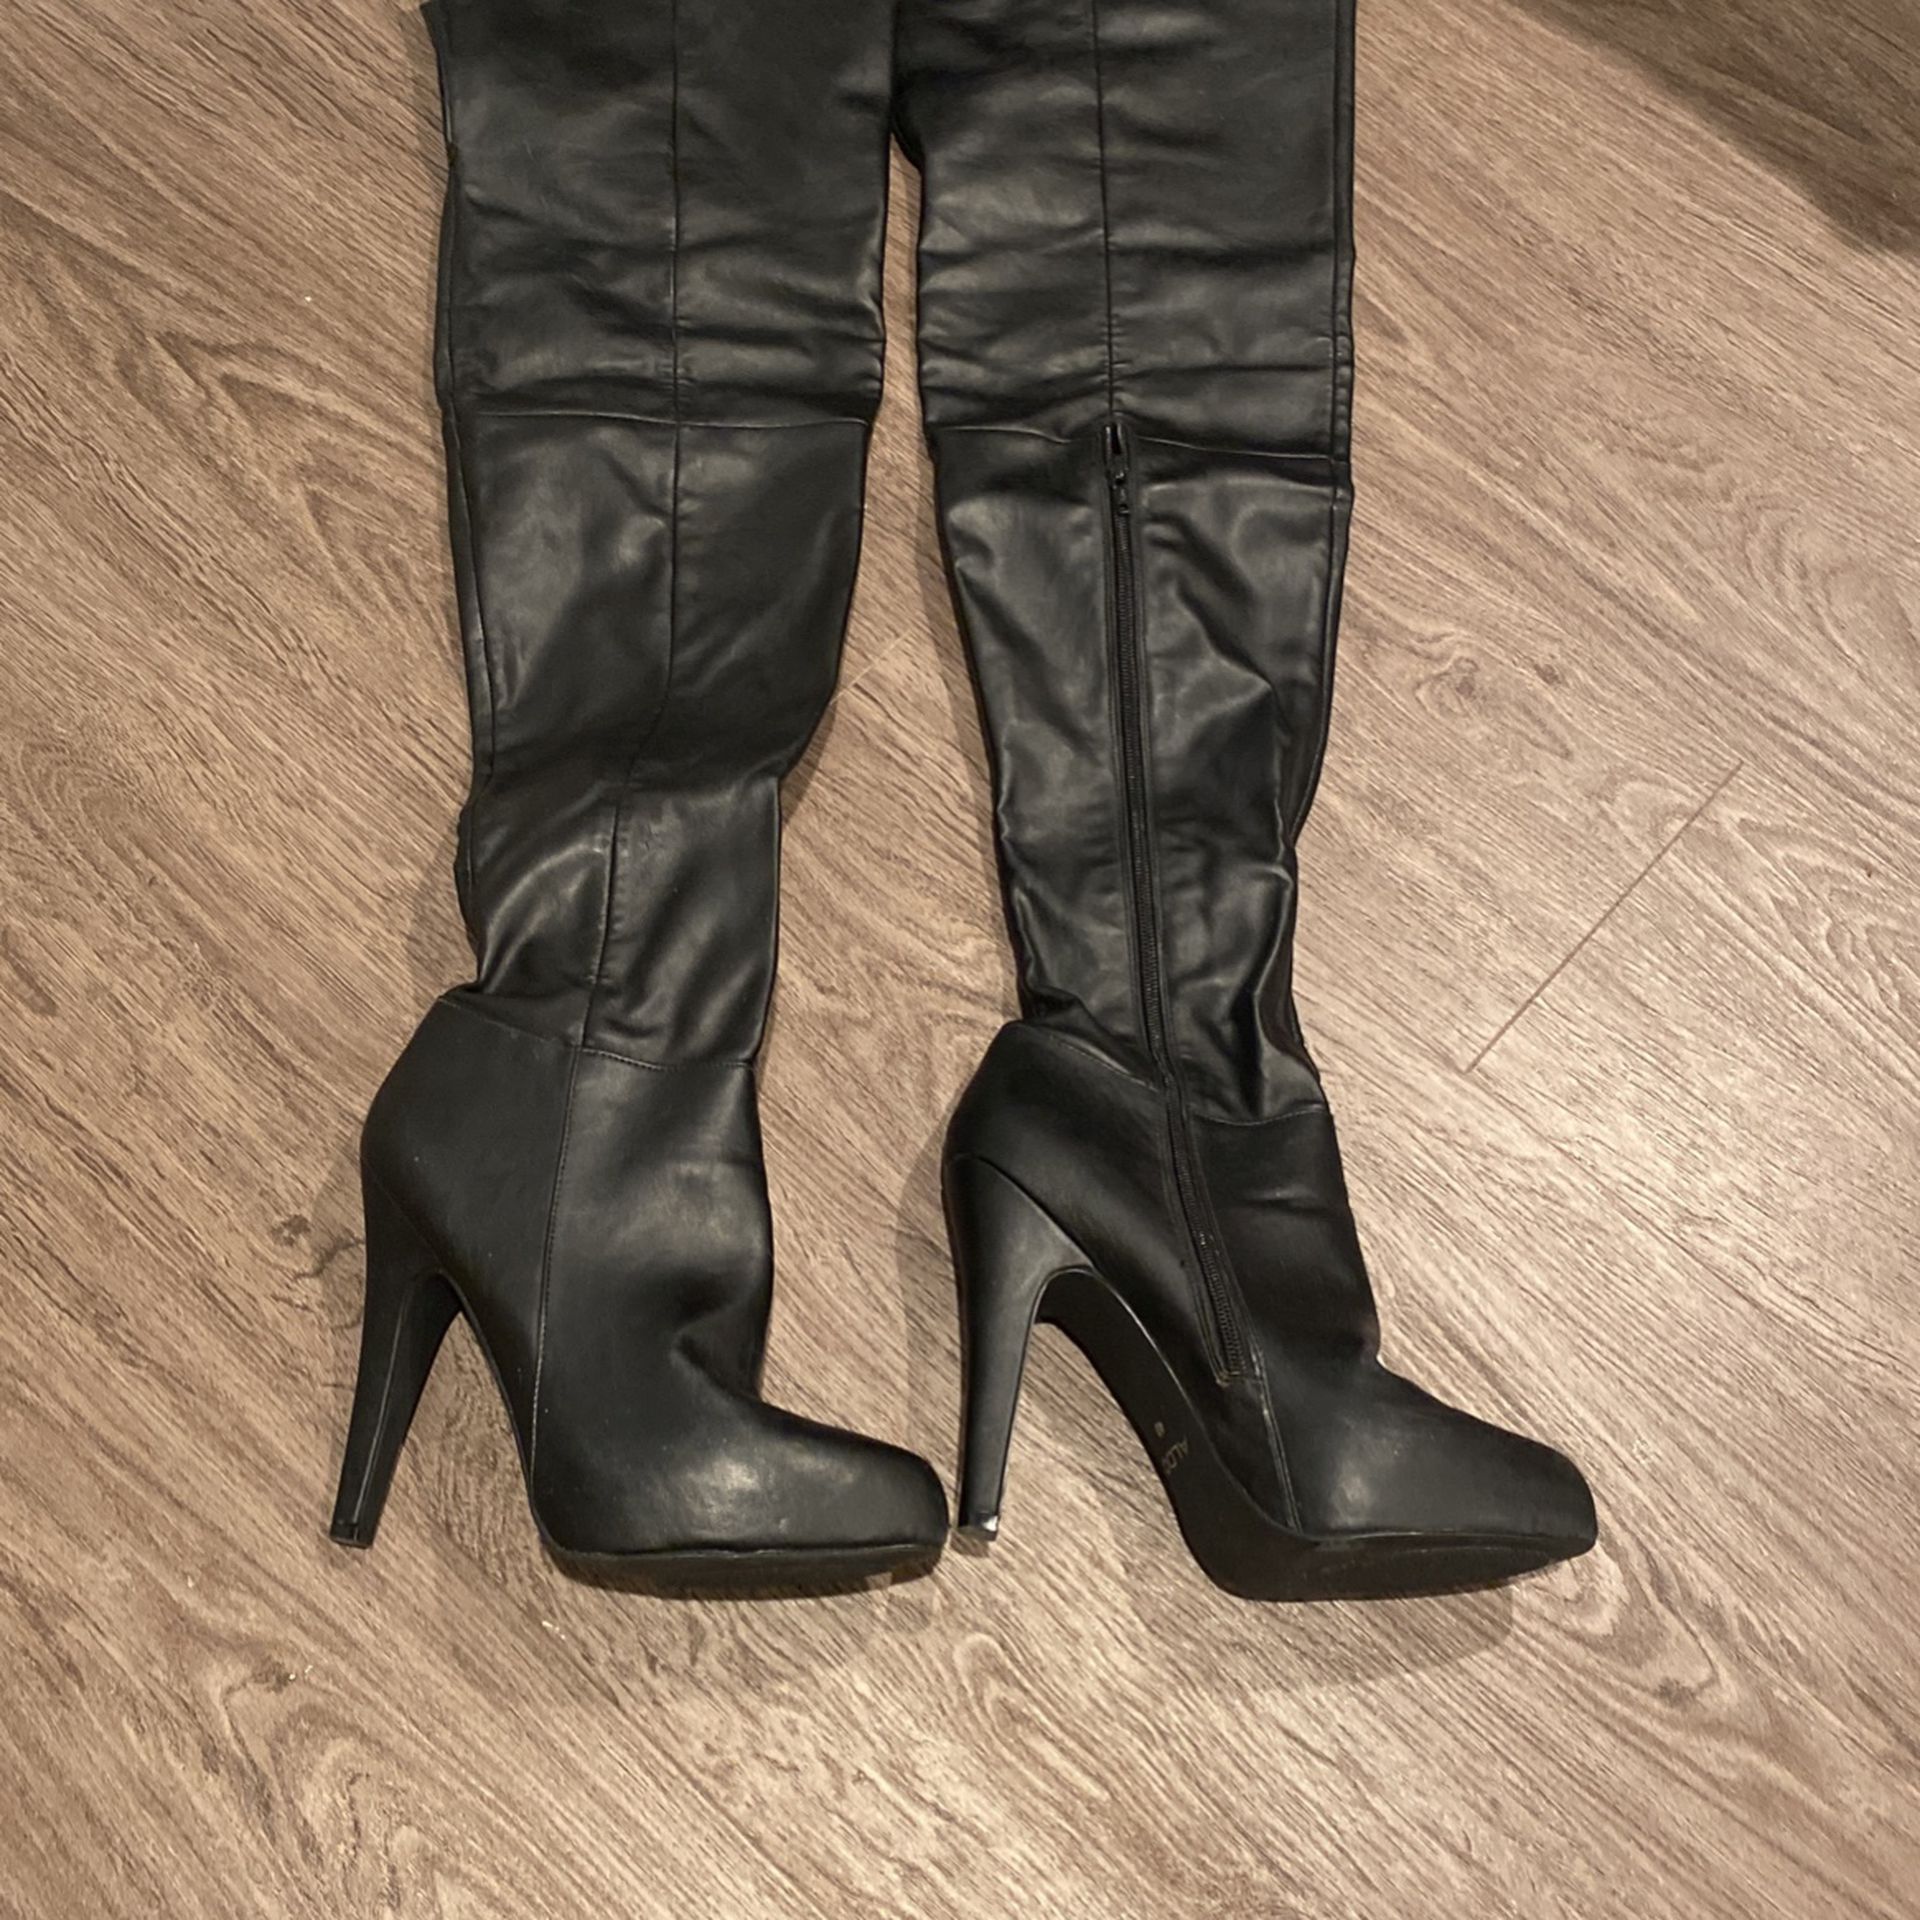 Above Knee Black Boots. 